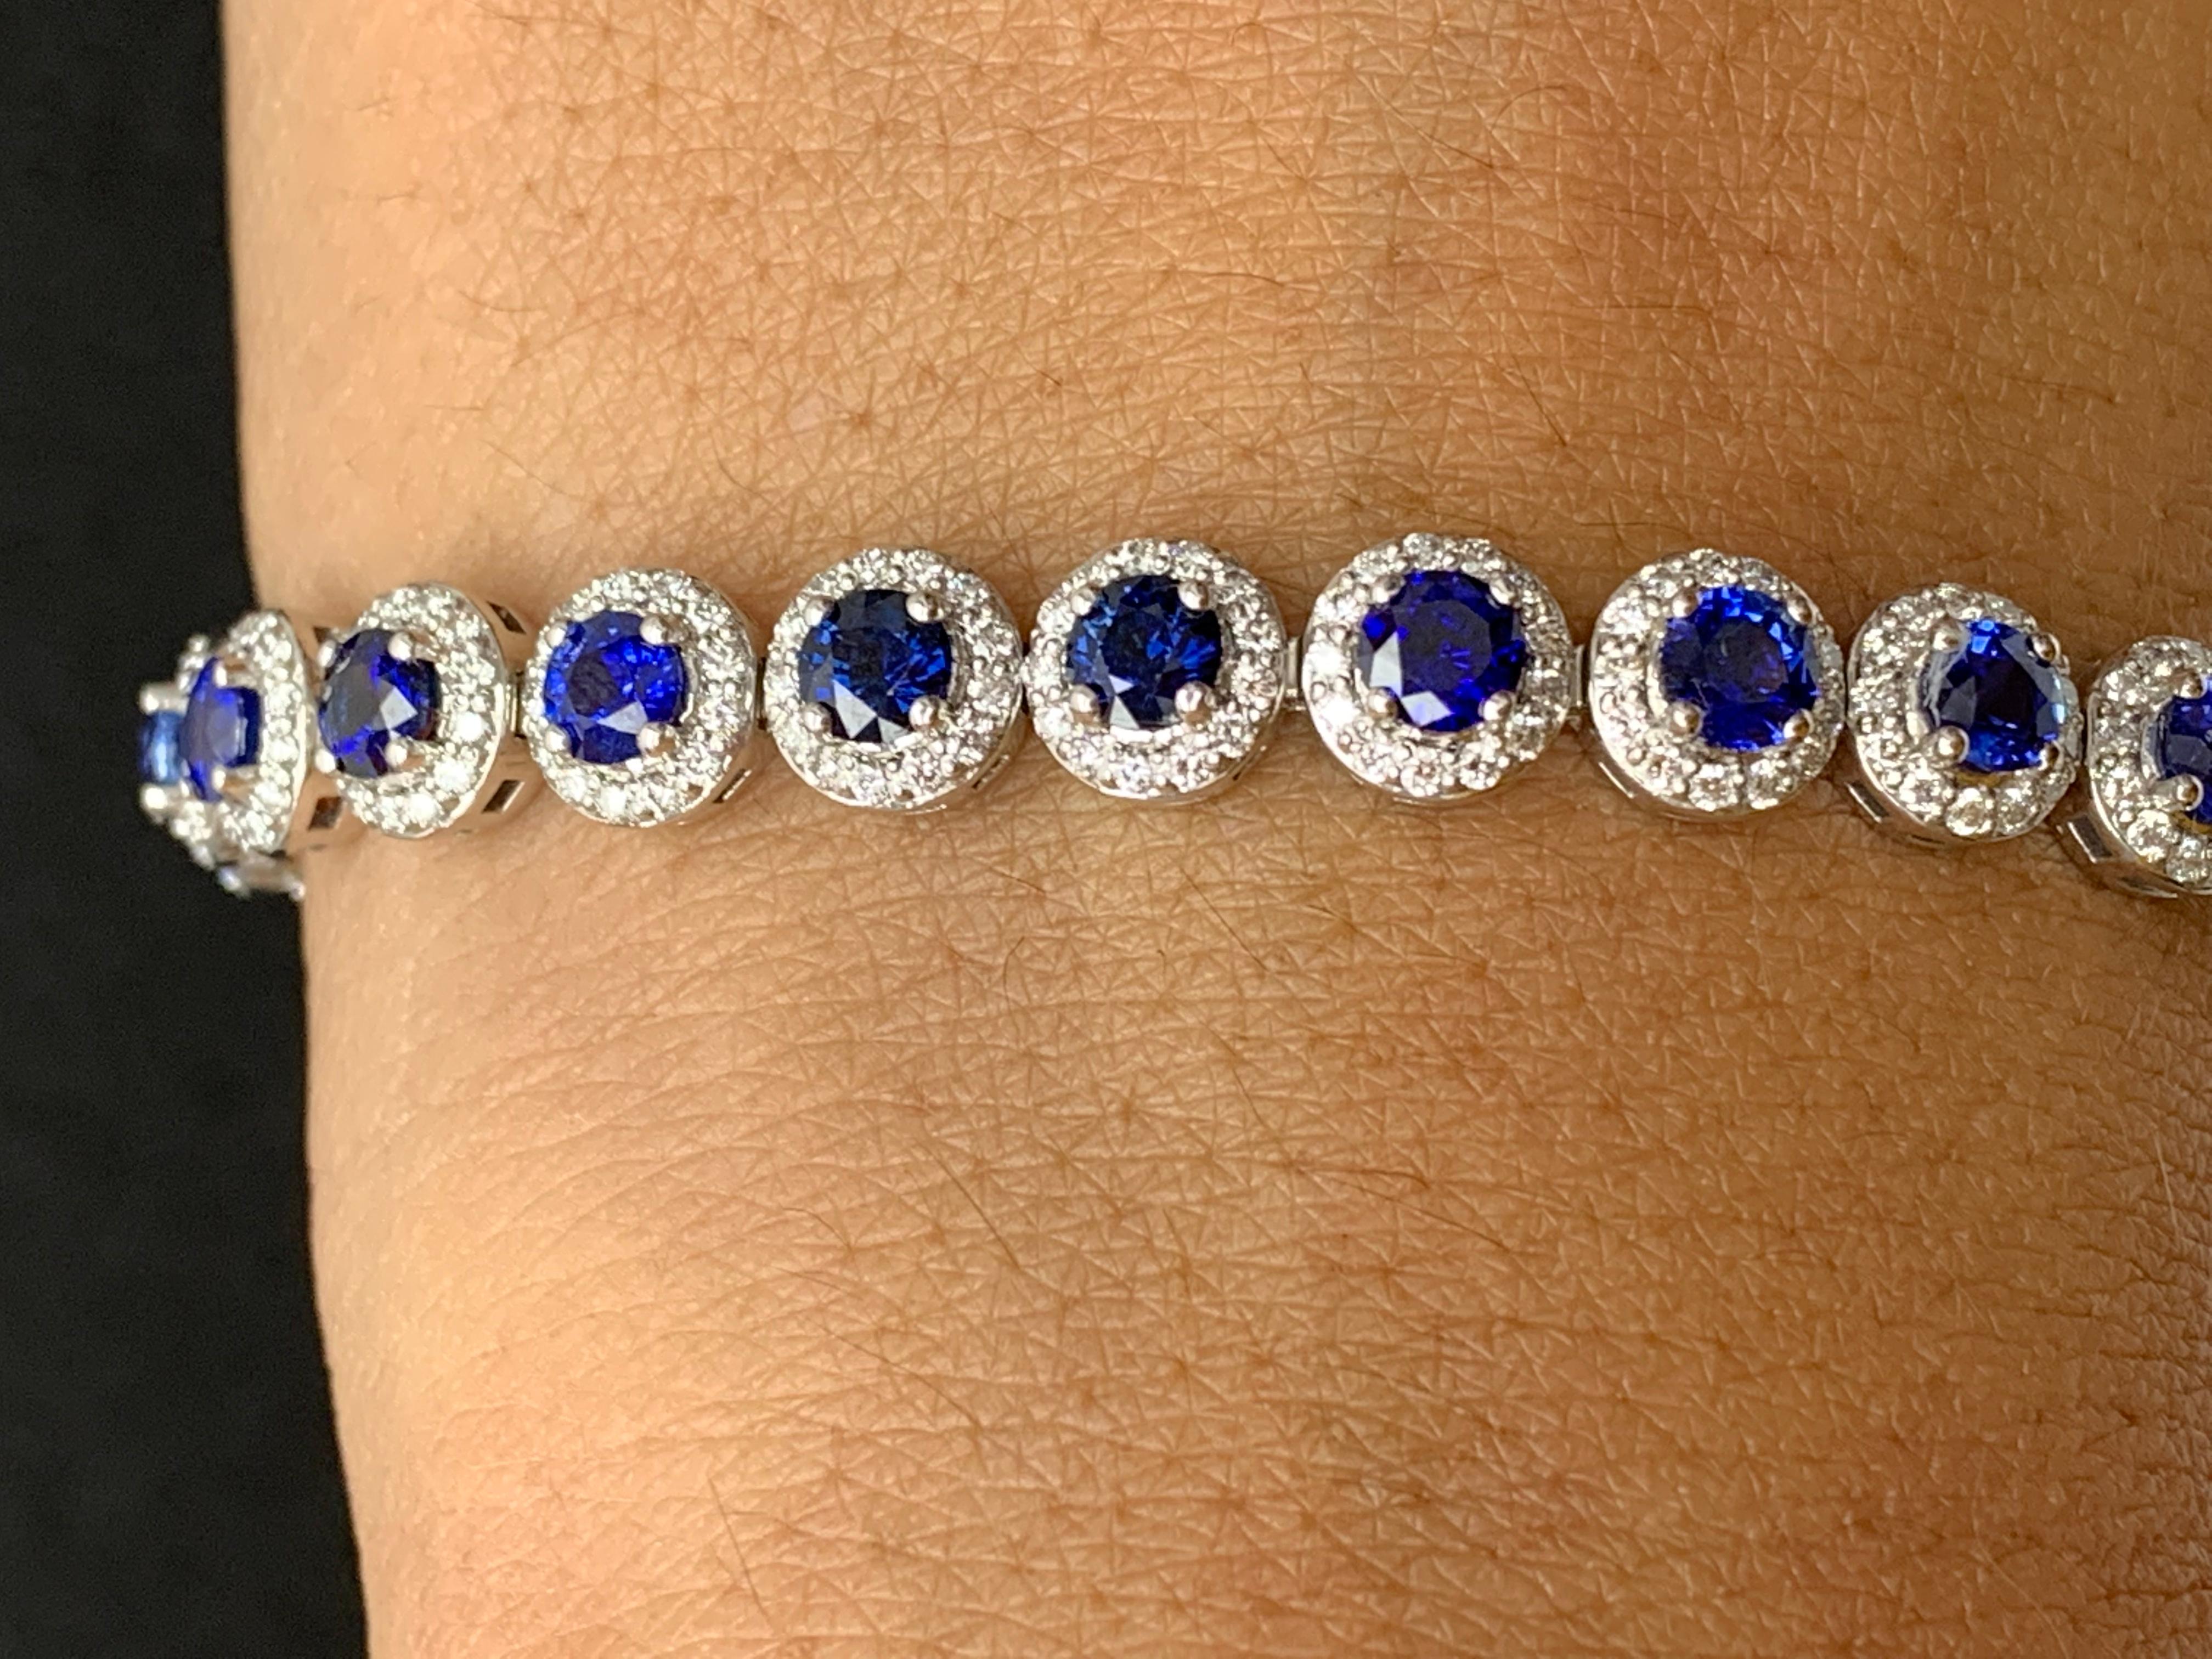 This gorgeous bracelet features 26 round brilliant blue sapphires weighing 7.47 carats total. Each stone is surrounded by a single row of small round 338 diamonds weighing 2.31 carats total. Set in 14k white gold.

Style available in different price